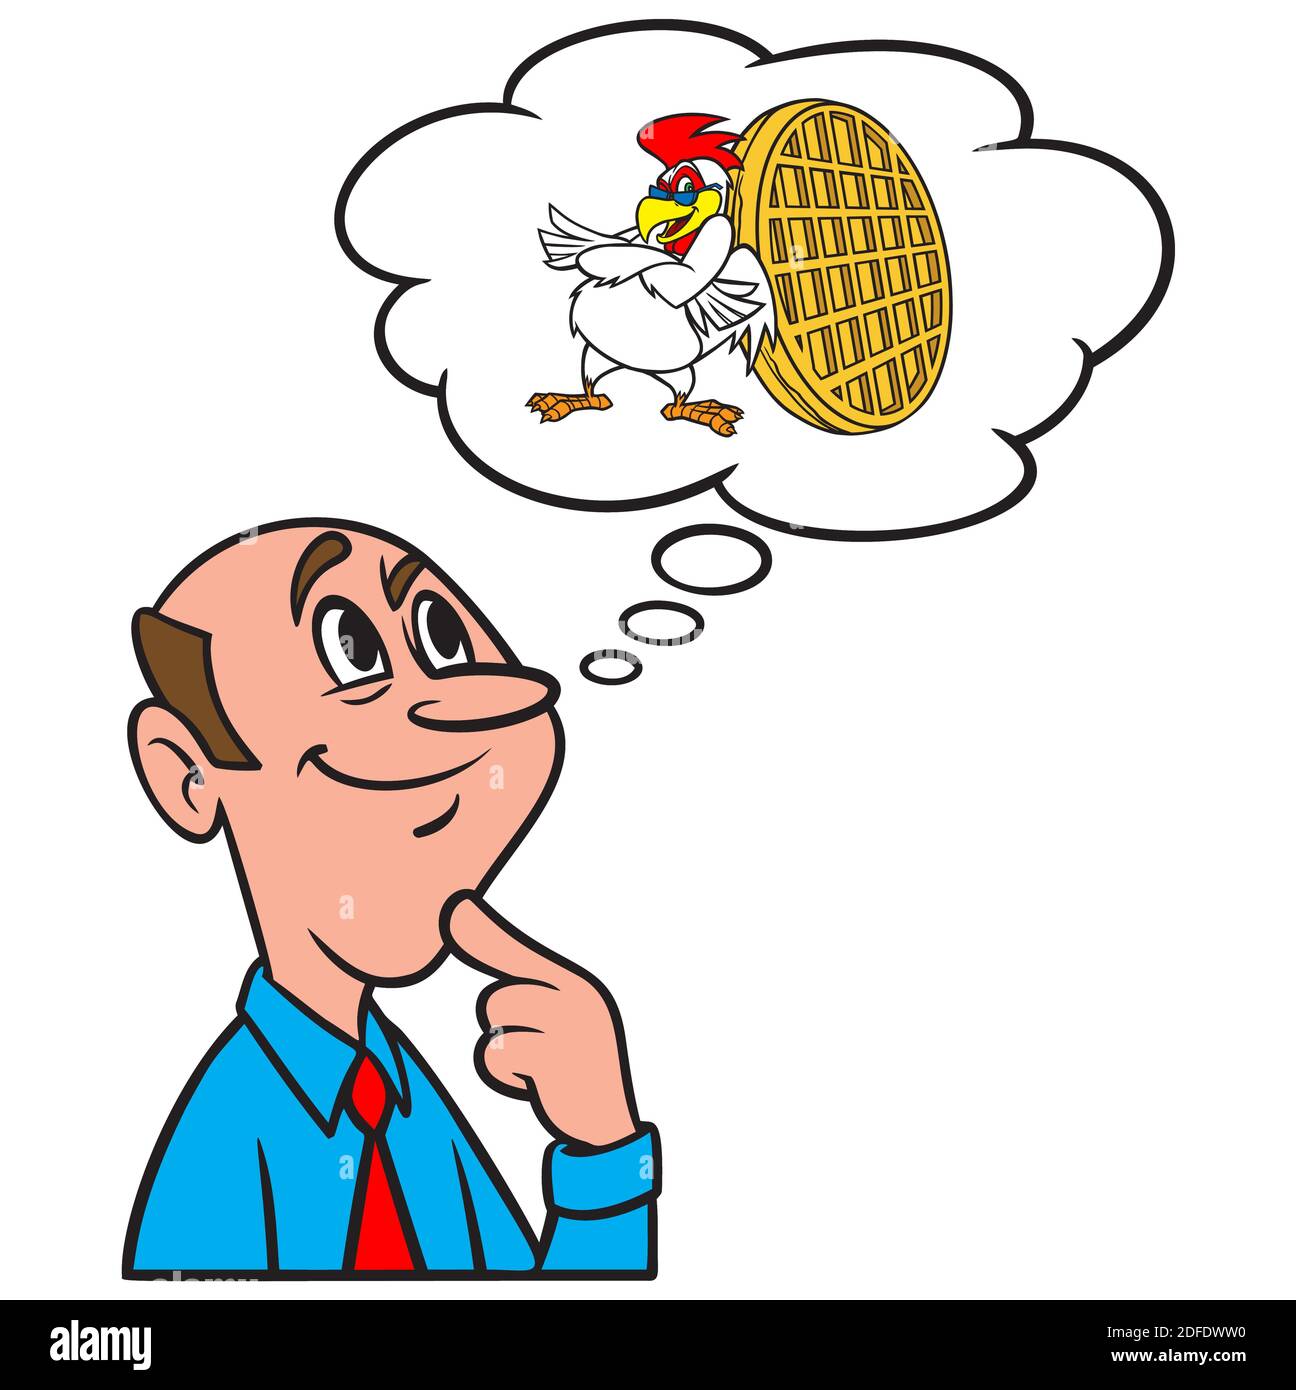 Thinking About About Chicken And Waffles A Cartoon Illustration Of A Man Thinking About Having Chicken And Waffles For Breakfast Stock Vector Image Art Alamy